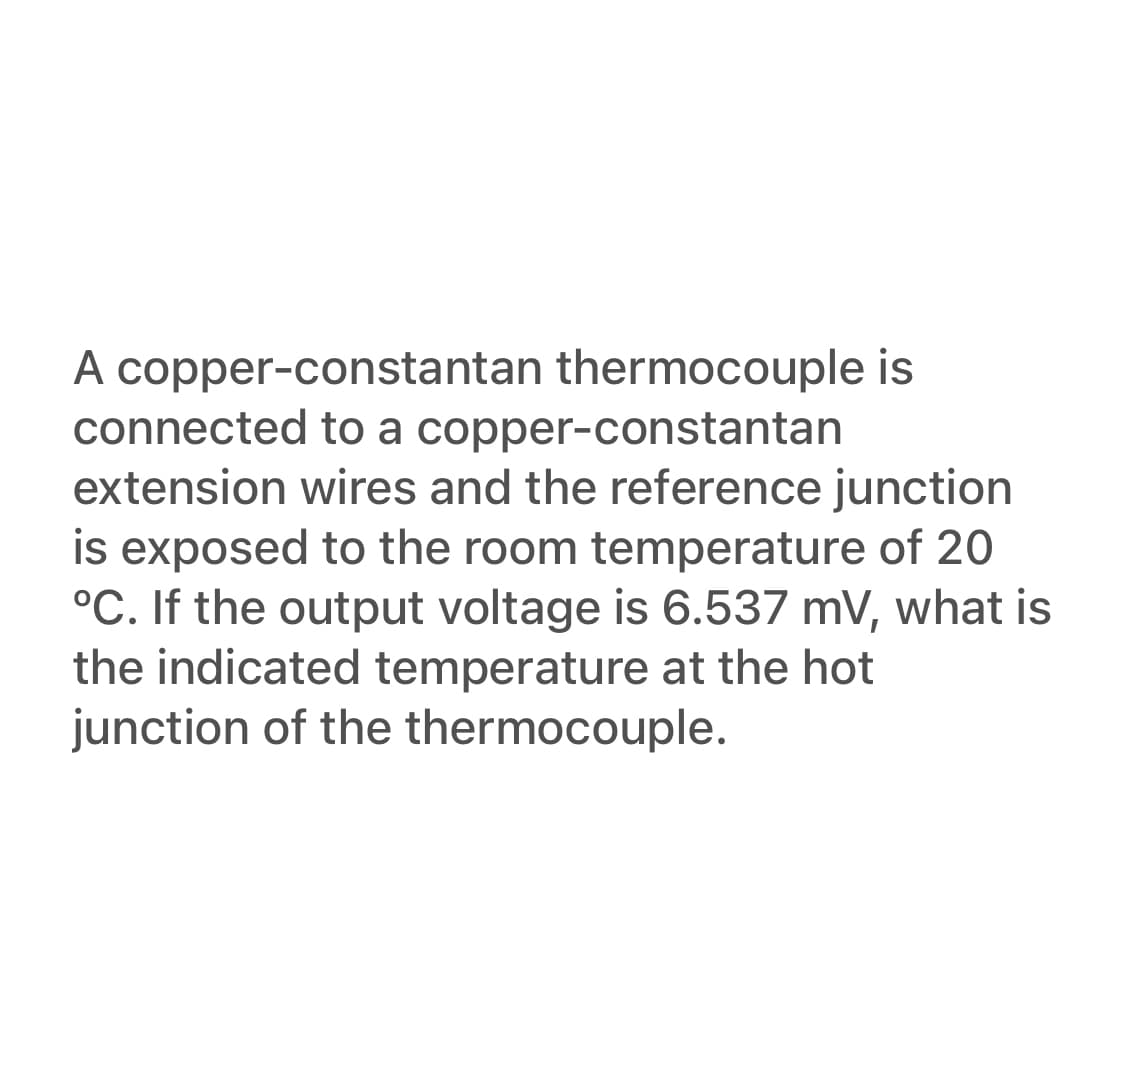 A copper-constantan thermocouple is
connected to a copper-constantan
extension wires and the reference junction
is exposed to the room temperature of 20
°C. If the output voltage is 6.537 mV, what is
the indicated temperature at the hot
junction of the thermocouple.